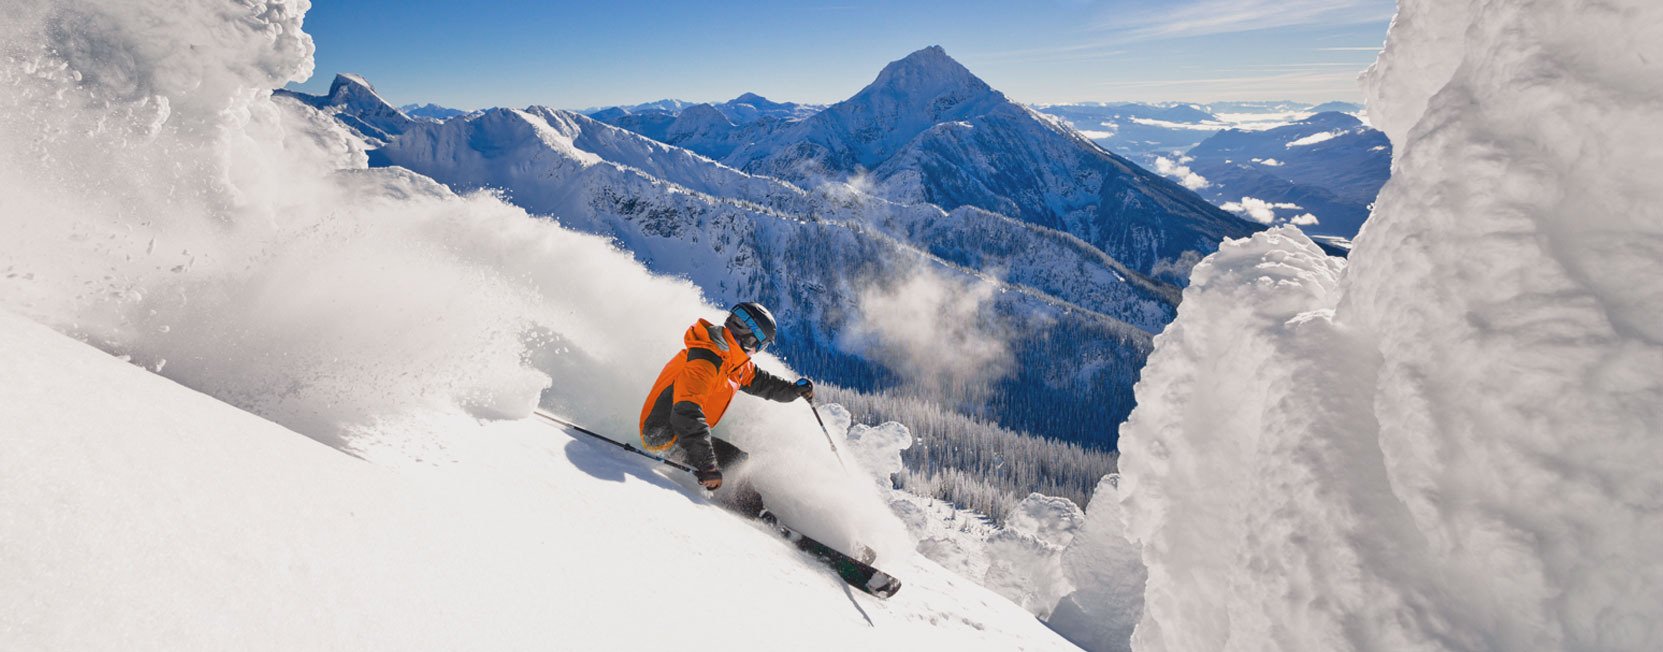 Ski Vacation Package - Save 10% at the Sutton Place Revelstoke!